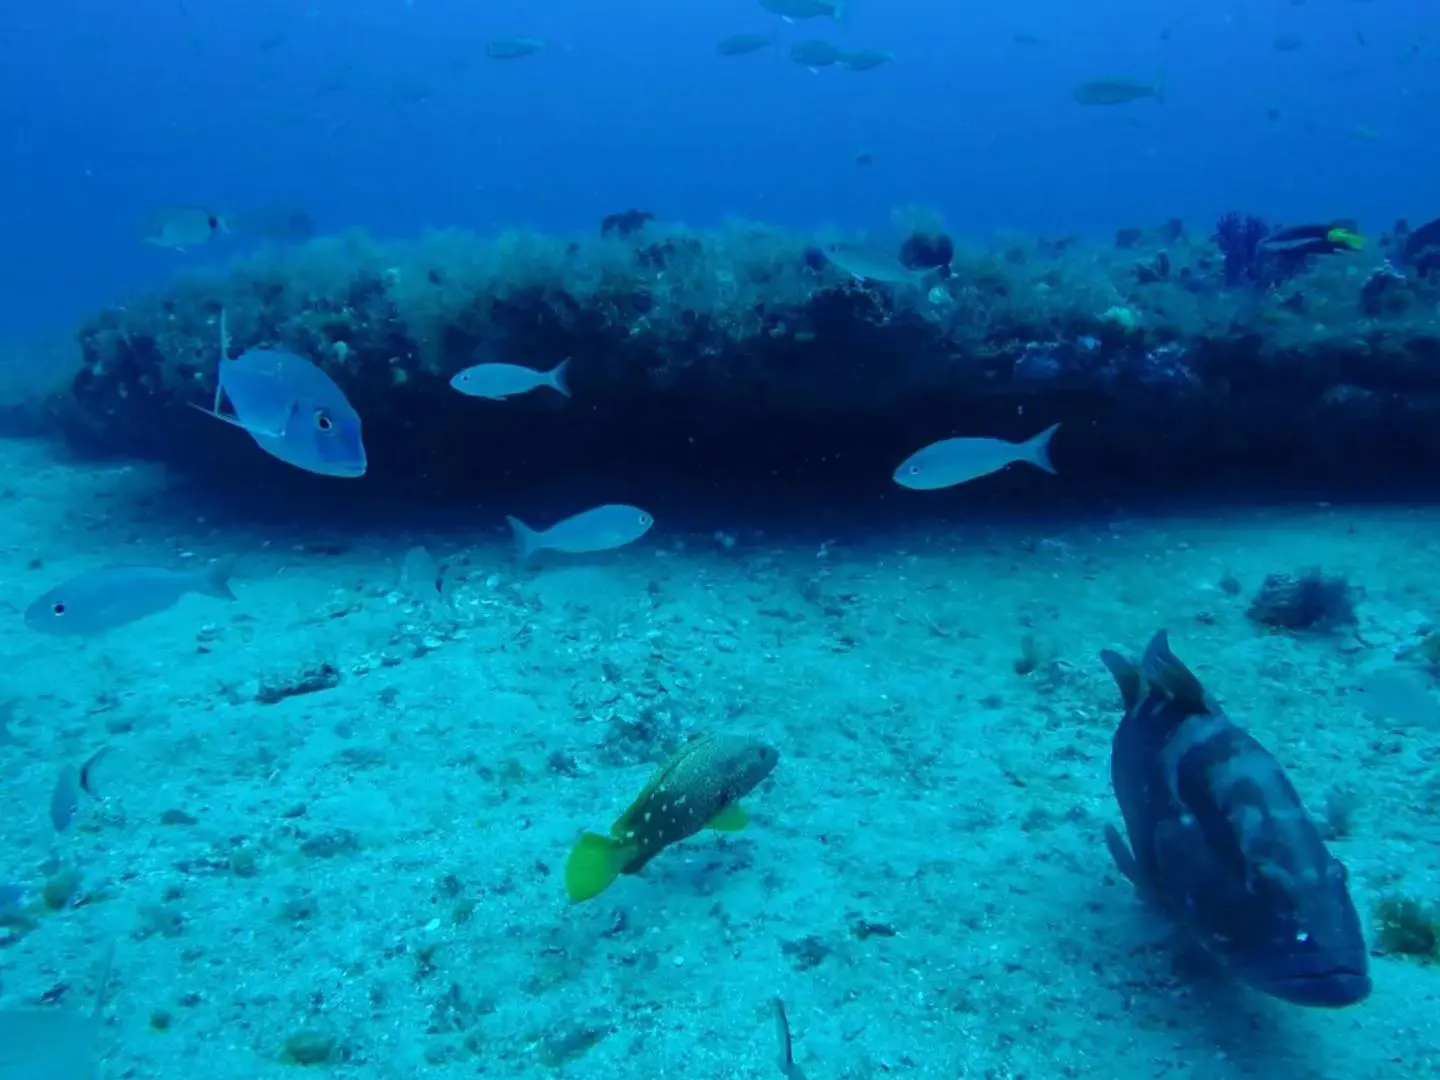 A fish swimming in the ocean next to an underwater structure.